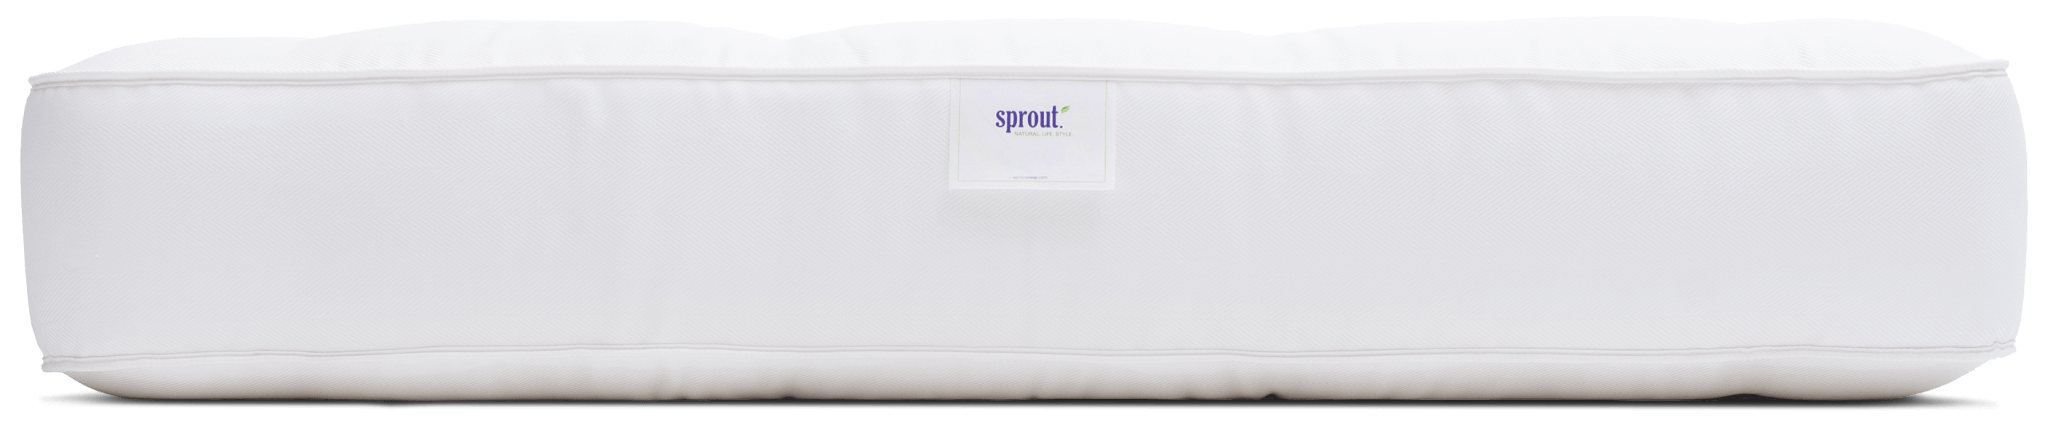 Sprout Firmus